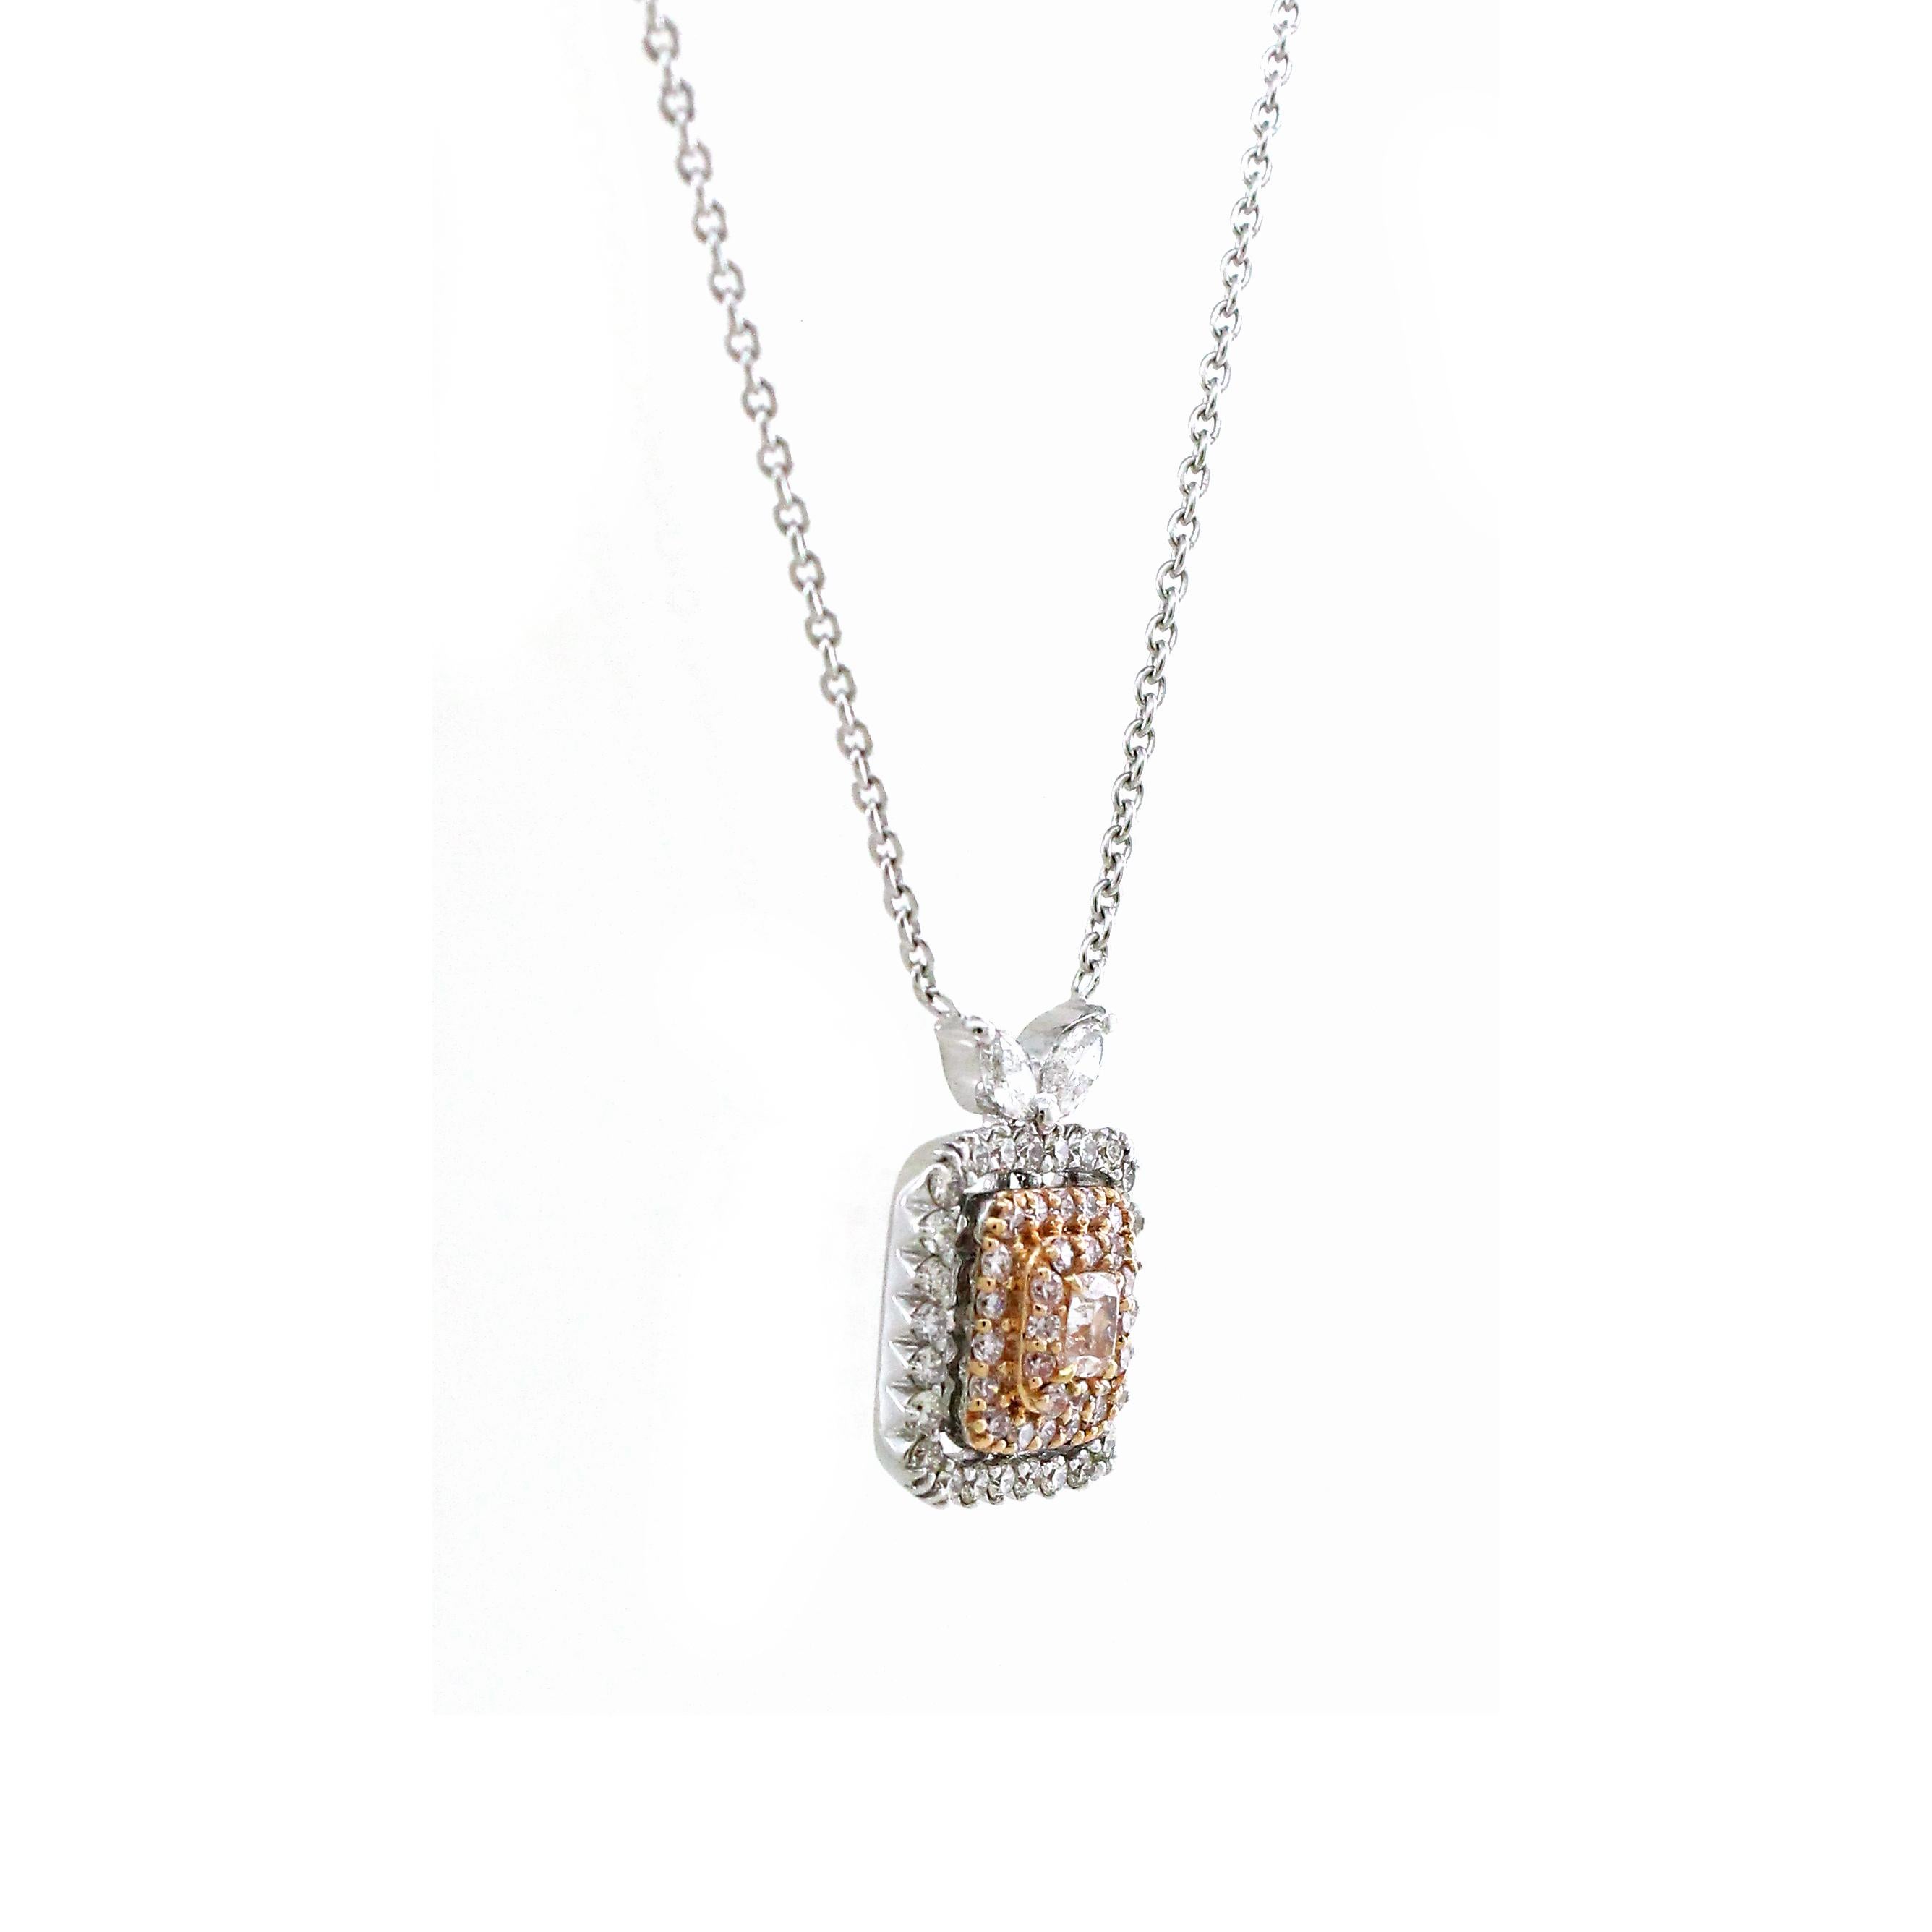 Prepare to be captivated by the sheer magnificence of this exquisite pendant, a true marvel of jewelry craftsmanship. At its core, a resplendent 0.13-carat pink cushion diamond emanates a radiant, blushing beauty. Surrounding this precious gem, two